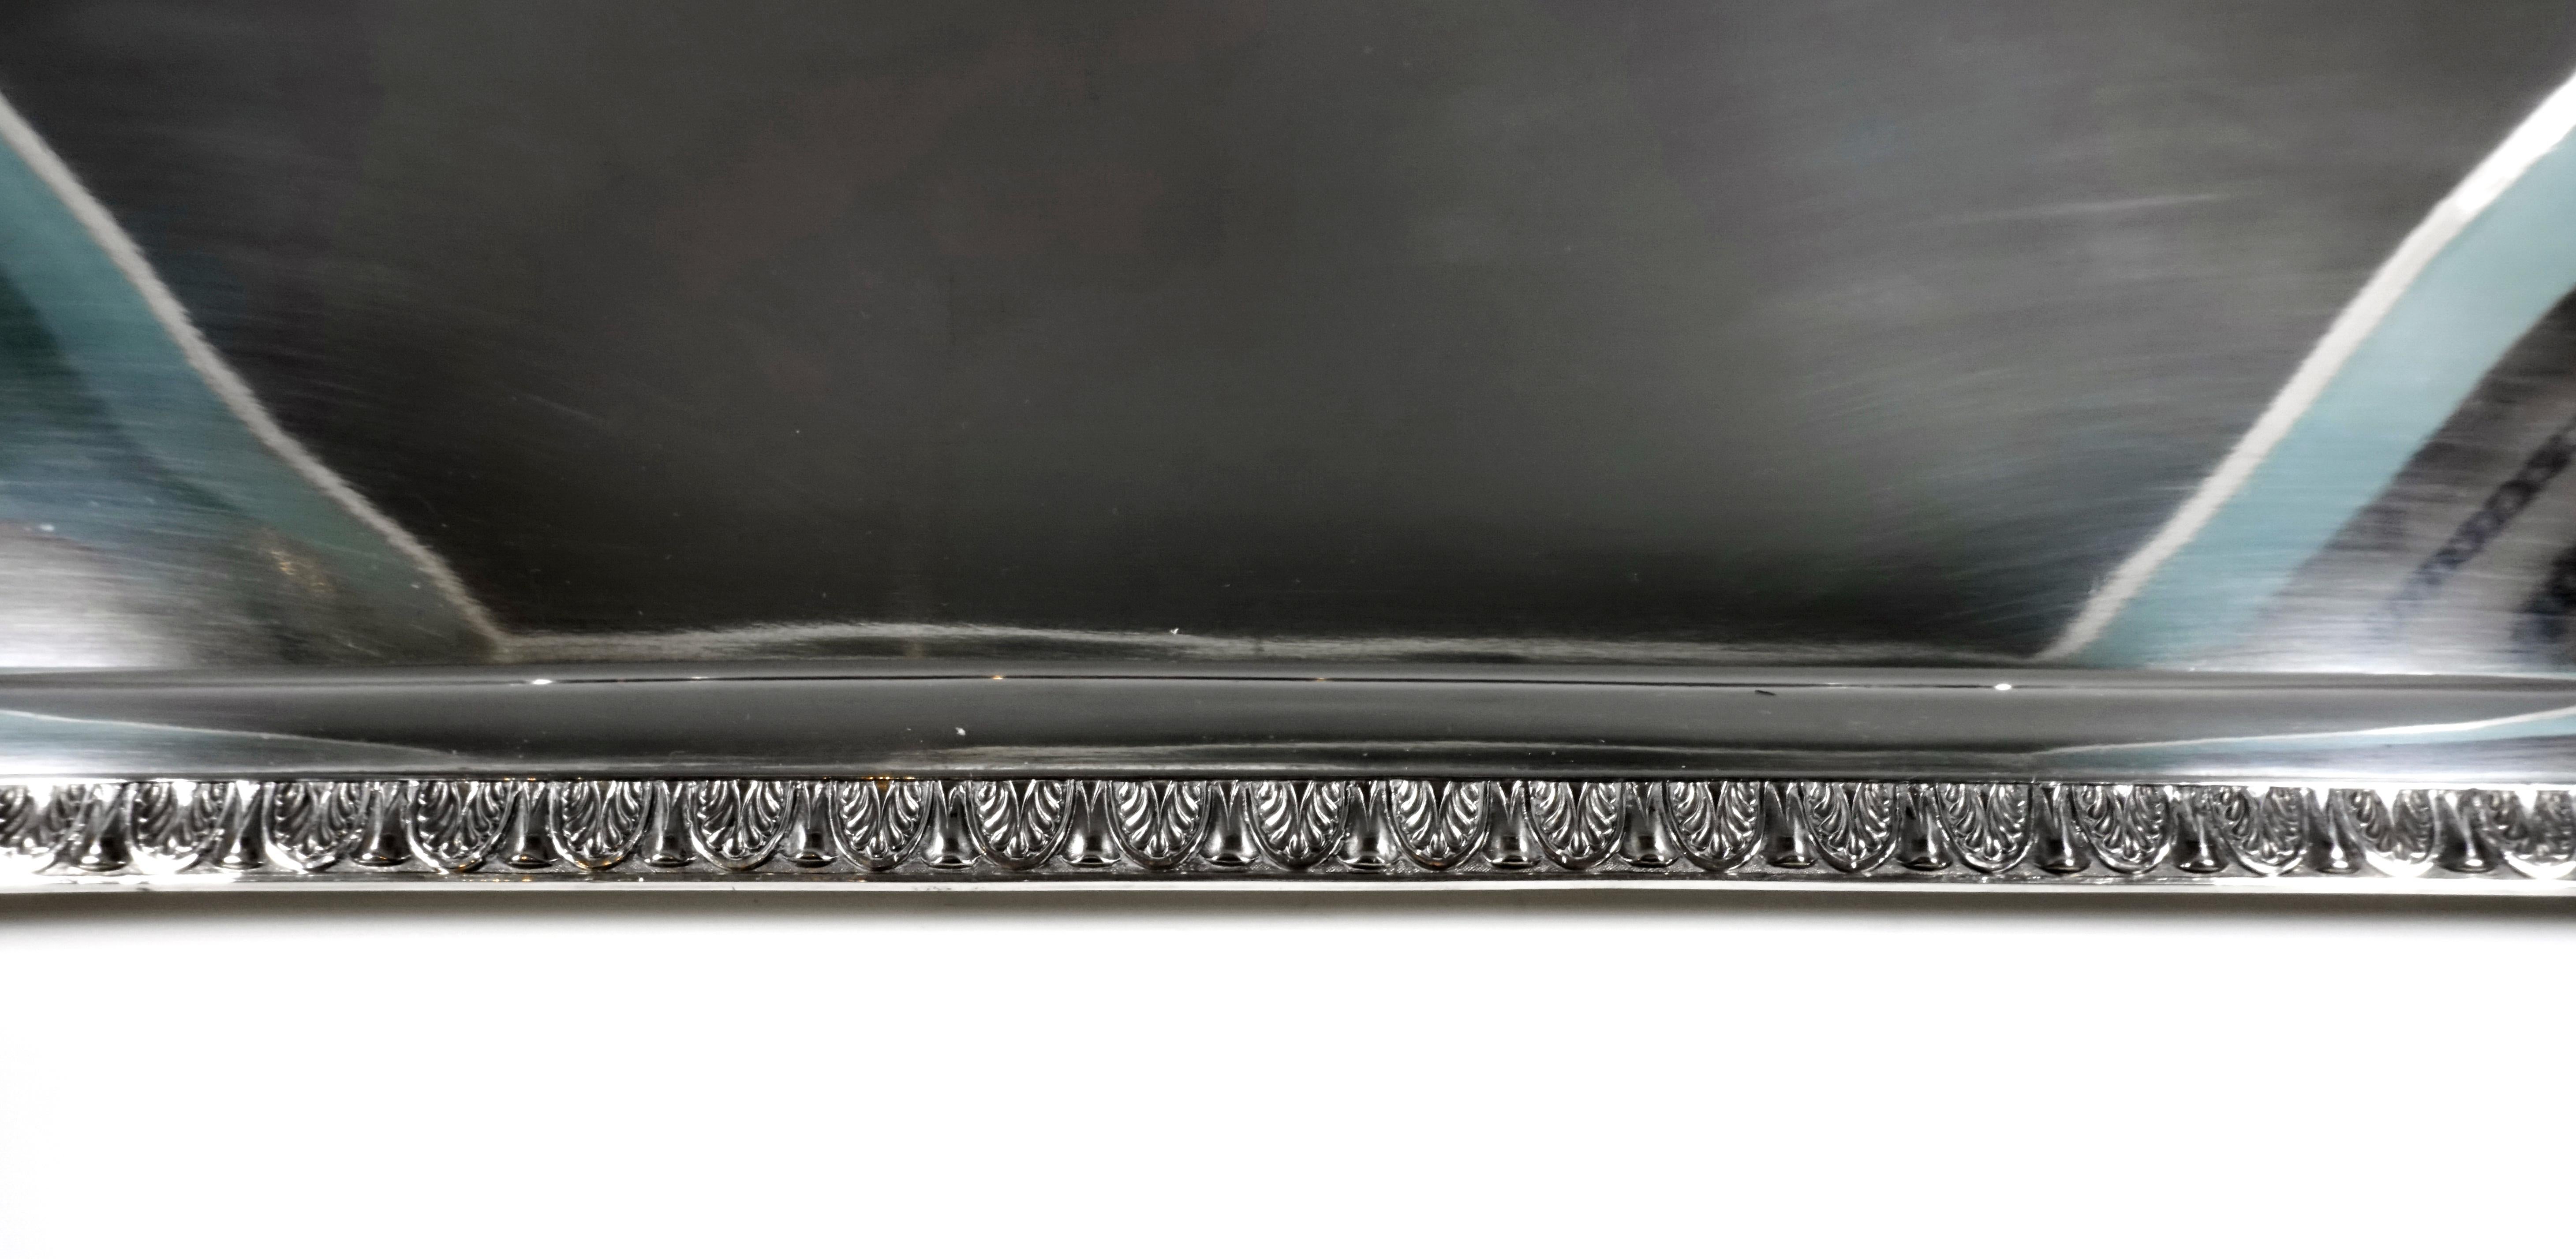 Hand-Crafted Large Viennese Silver Art Nouveau Tray by Eduard Friedmann, circa 1900